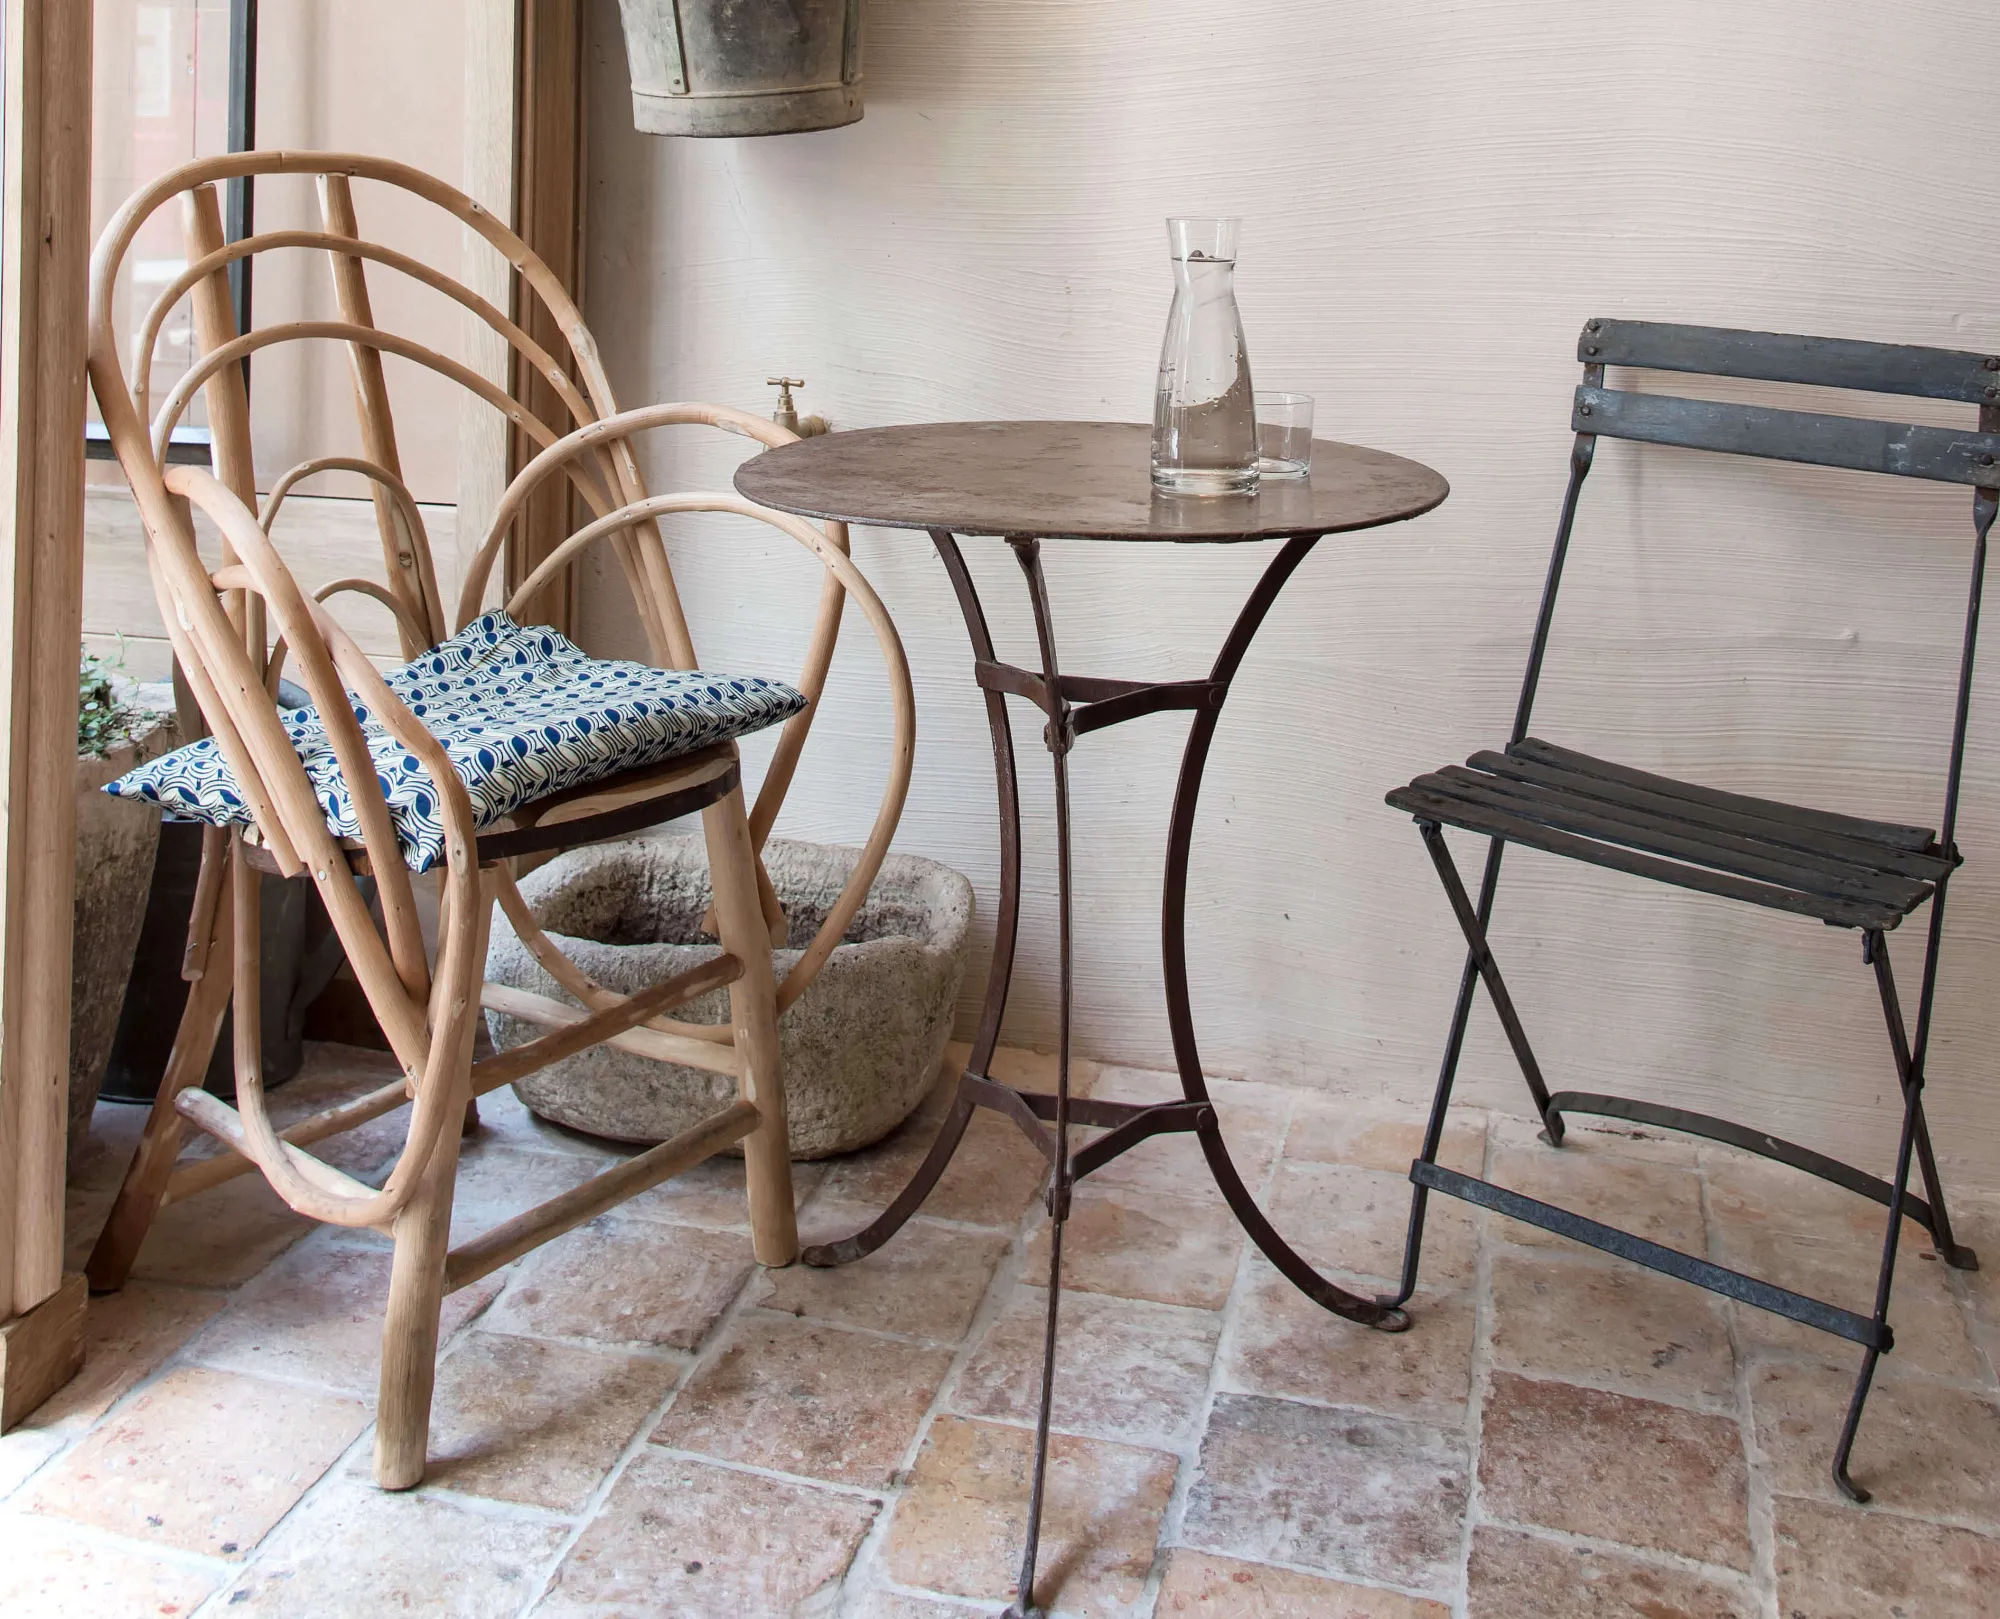 Summer In The Chateau Garden: 11 Vintage Ideas To Steal From Cafe Ineko In Paris 